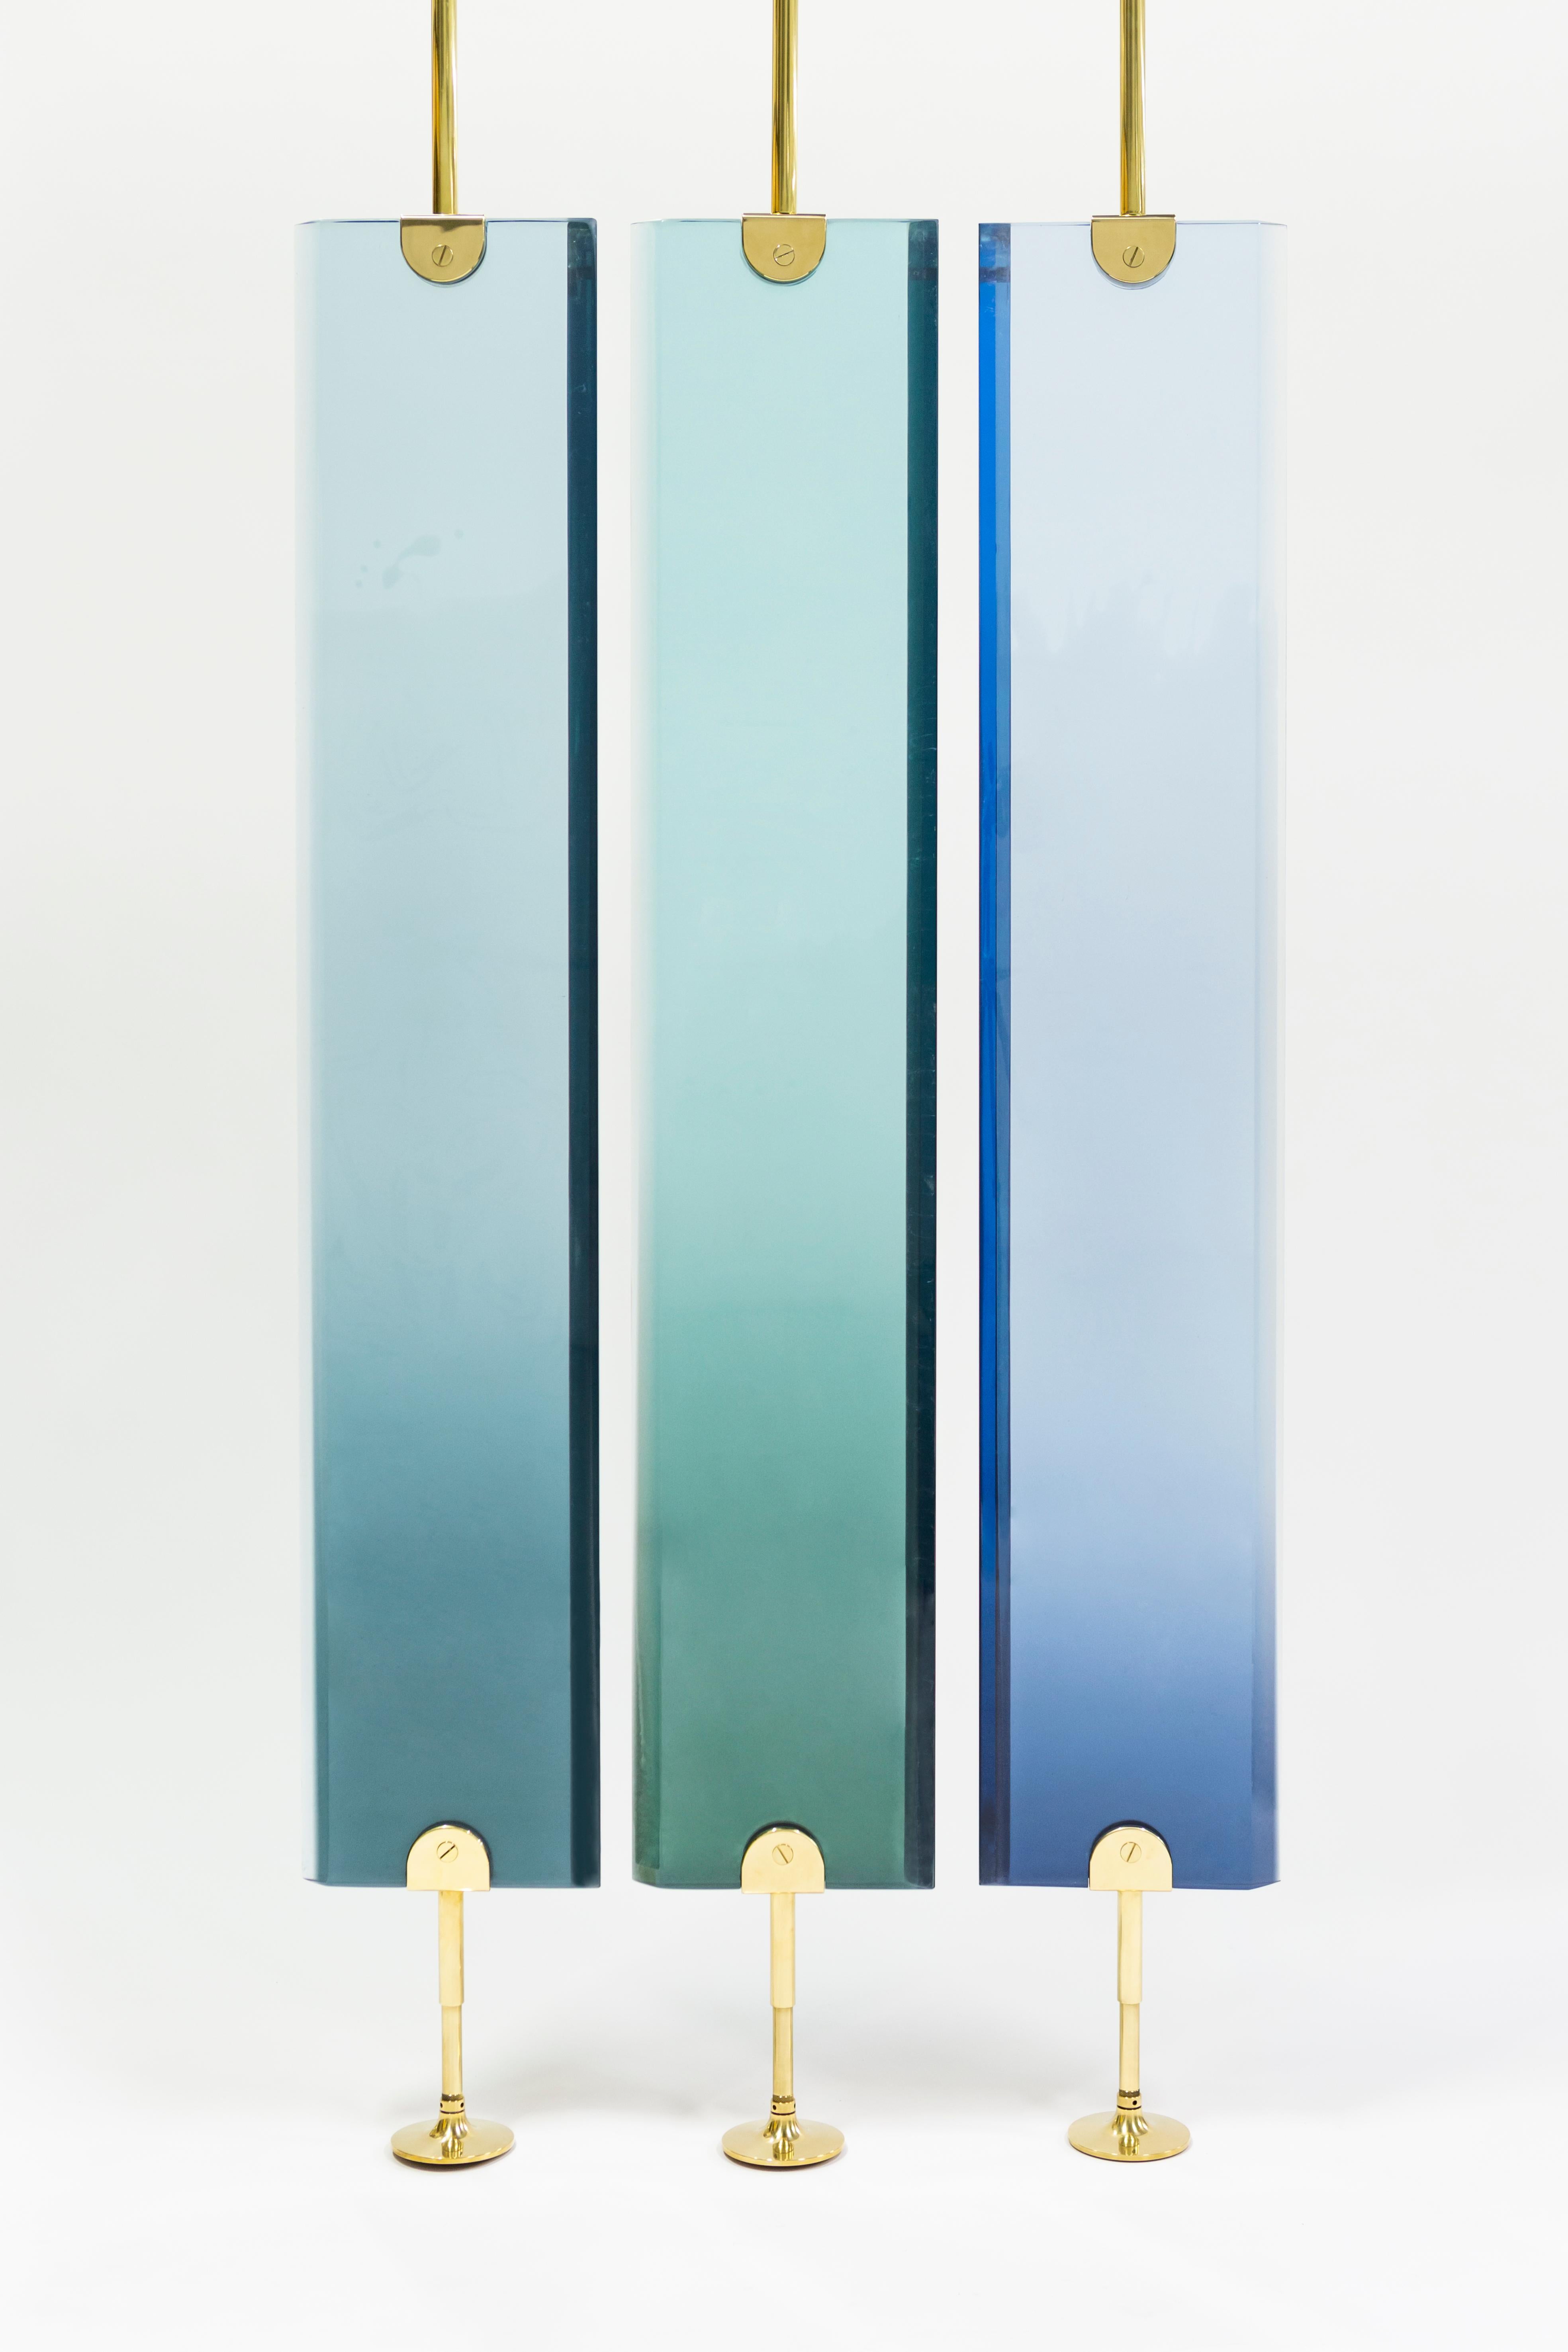 Contemporary Reverso Separè Blue Shades by Draga&Aurel Resin and Brass, 21st Century For Sale